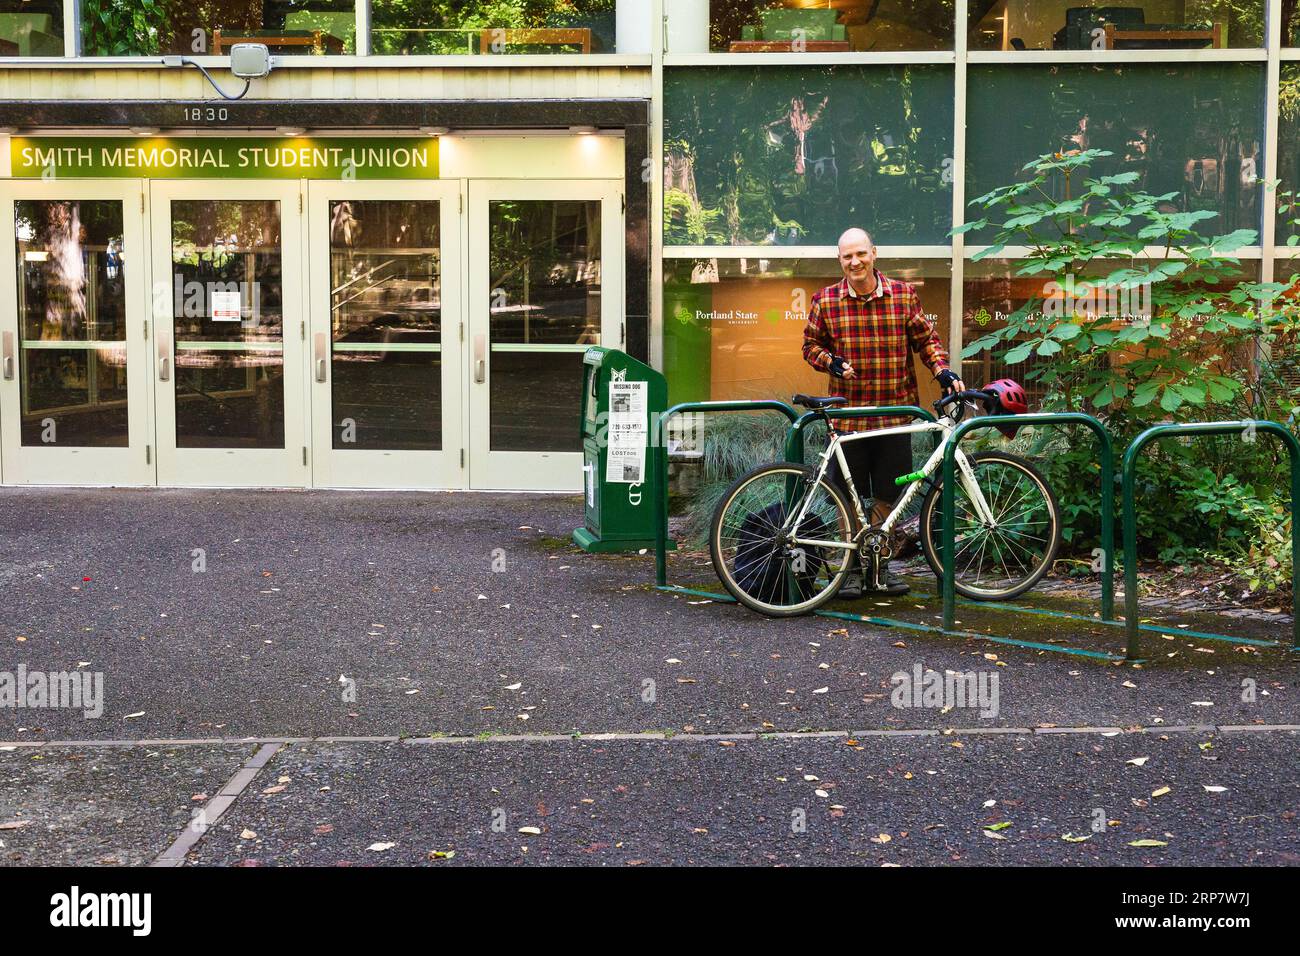 Man locking up his bike outside the Smith Memorial Student Union building at Portland State University in Portland Oregon Stock Photo